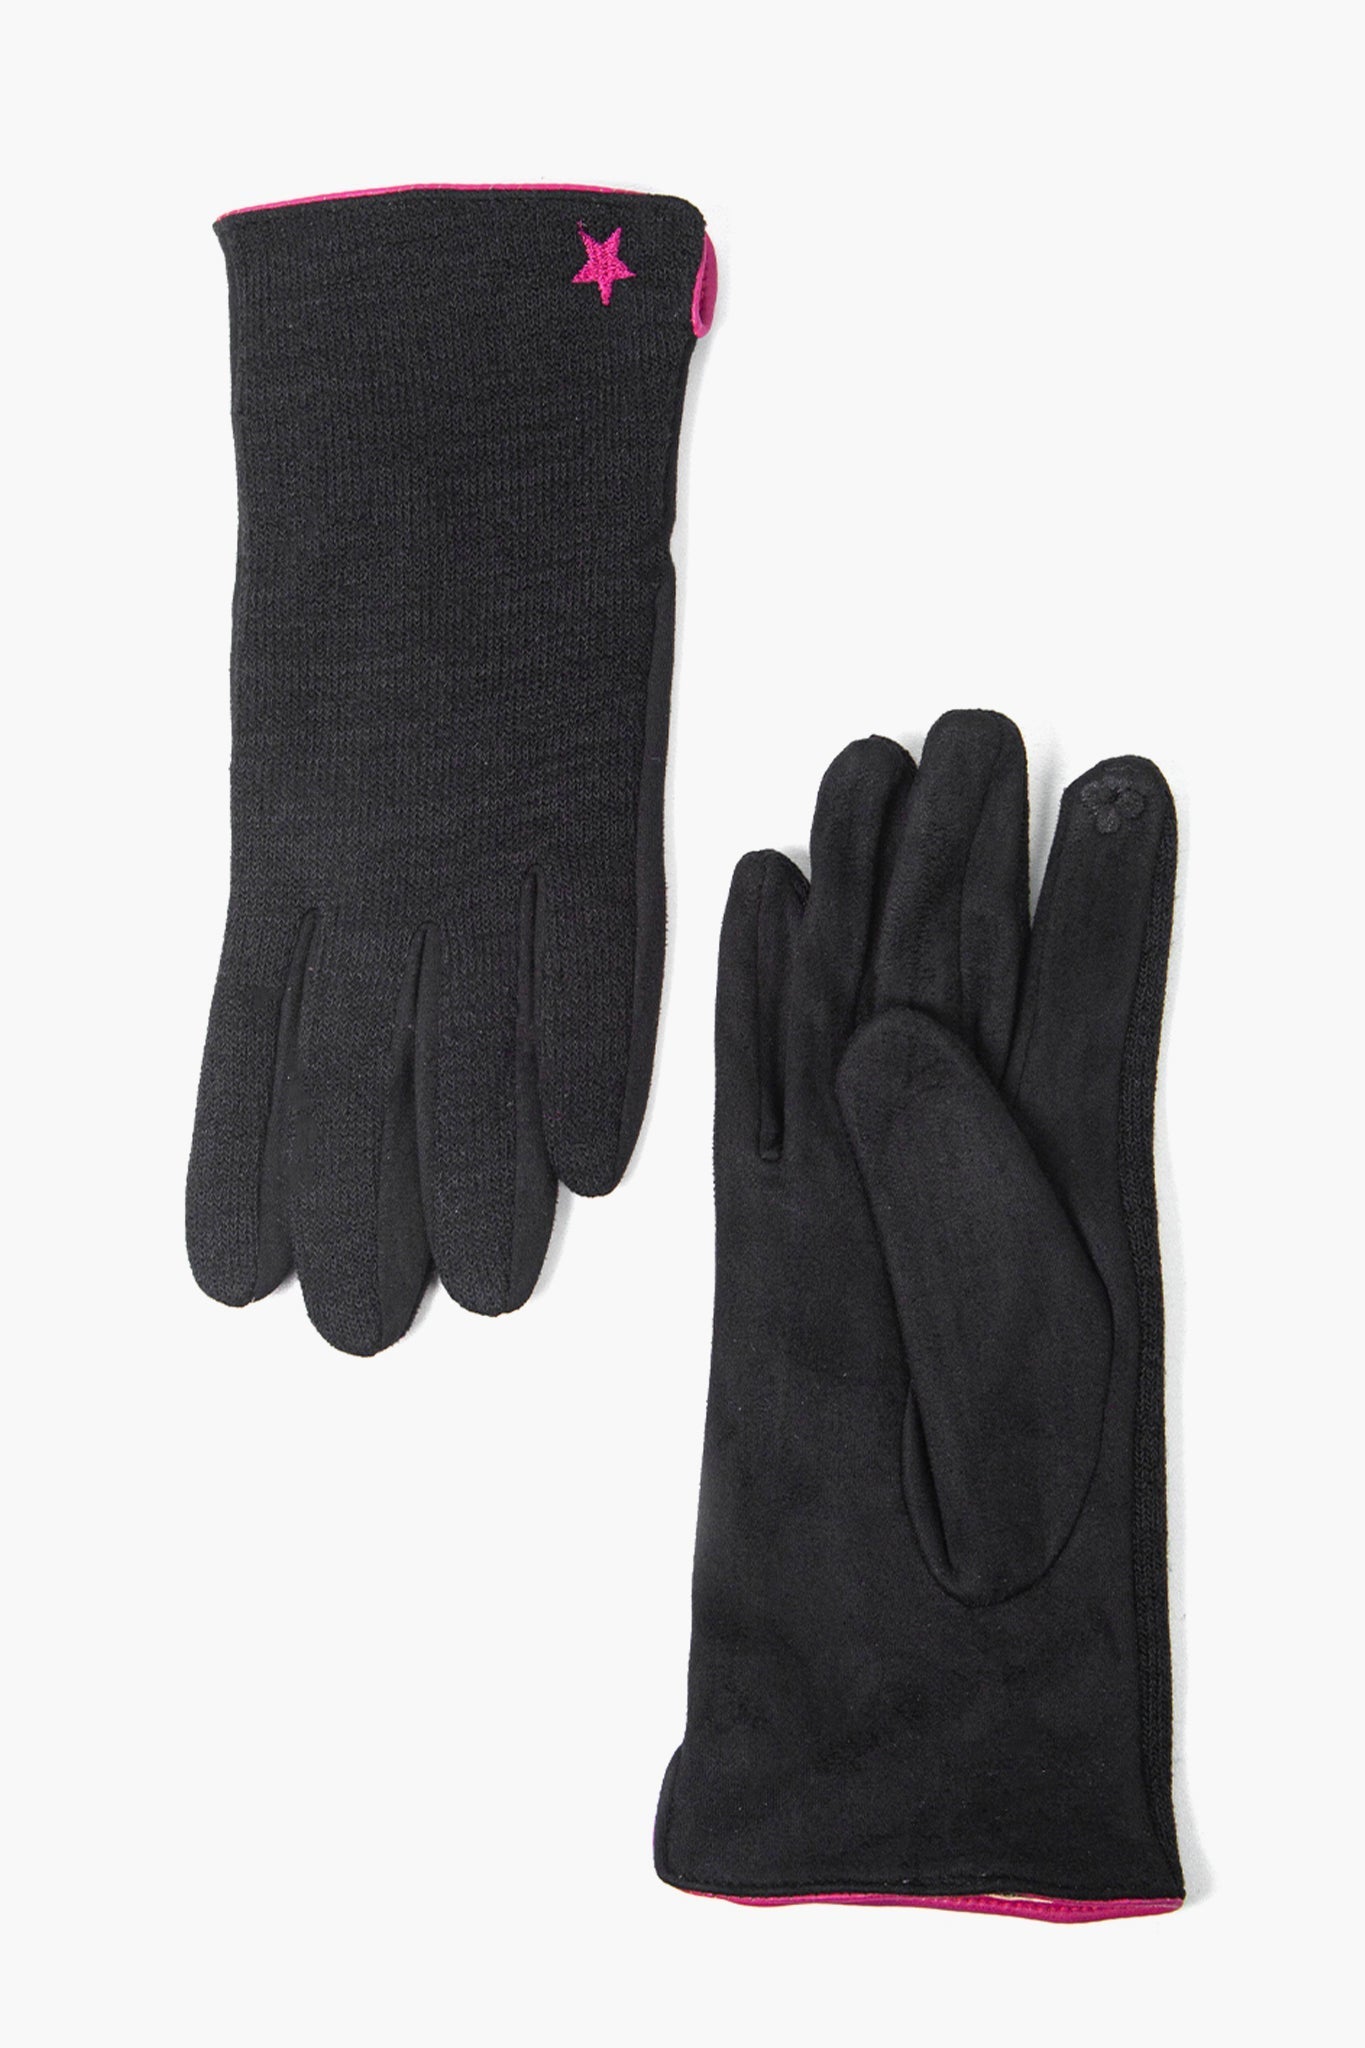 black gloves showing the back with the embroidered star and the palm with the touch screen responsive index finger